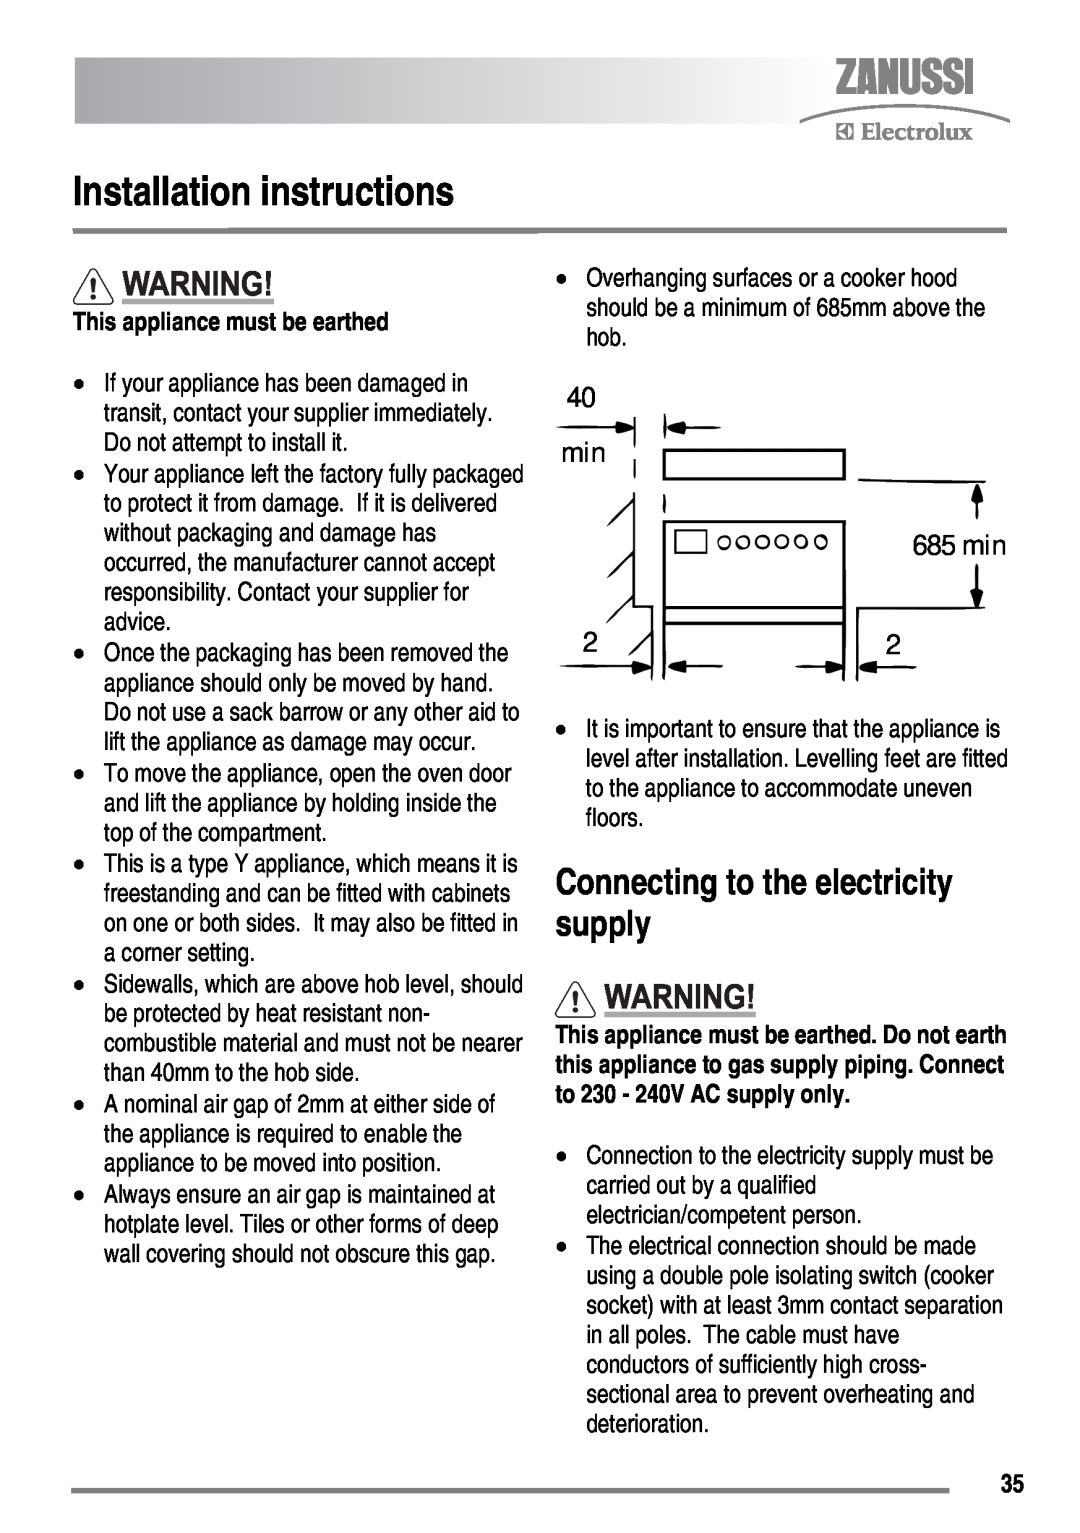 Zanussi ZKC6040 user manual Installation instructions, Connecting to the electricity supply, This appliance must be earthed 